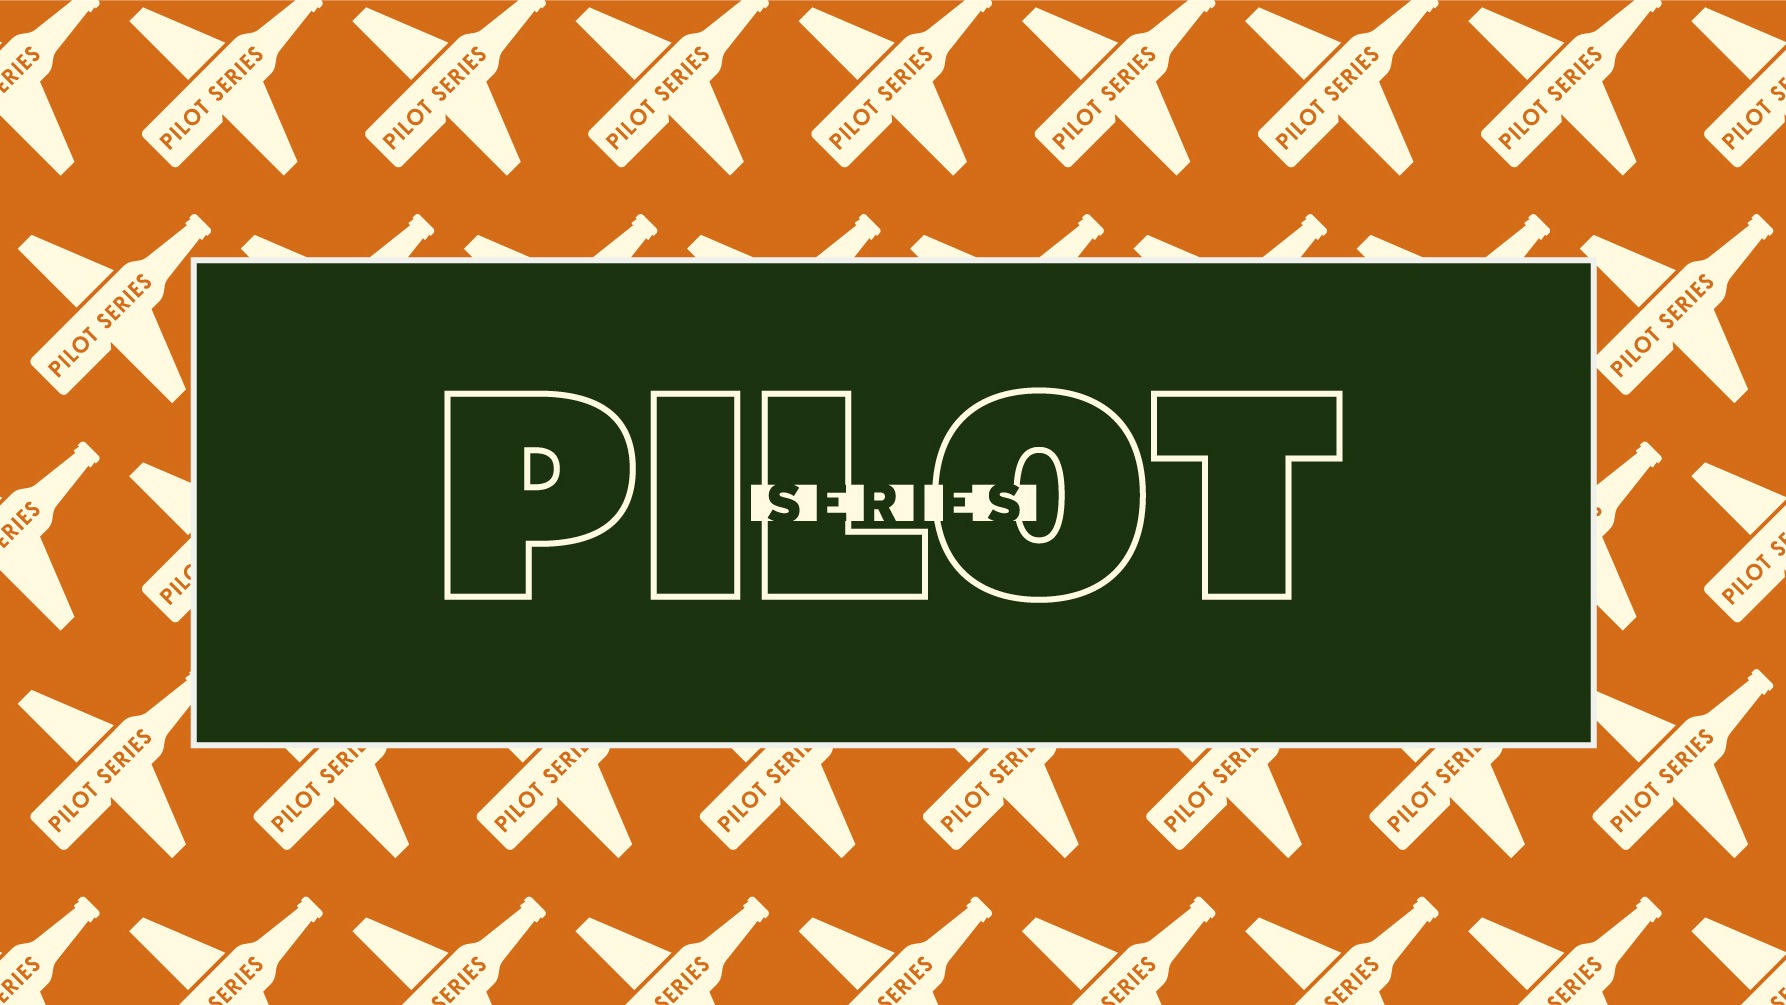 Green rectangle with big "PILOT SERIES" text. The green rectangle is on top of another orange rectangle with beer bottles that look like airplanes.